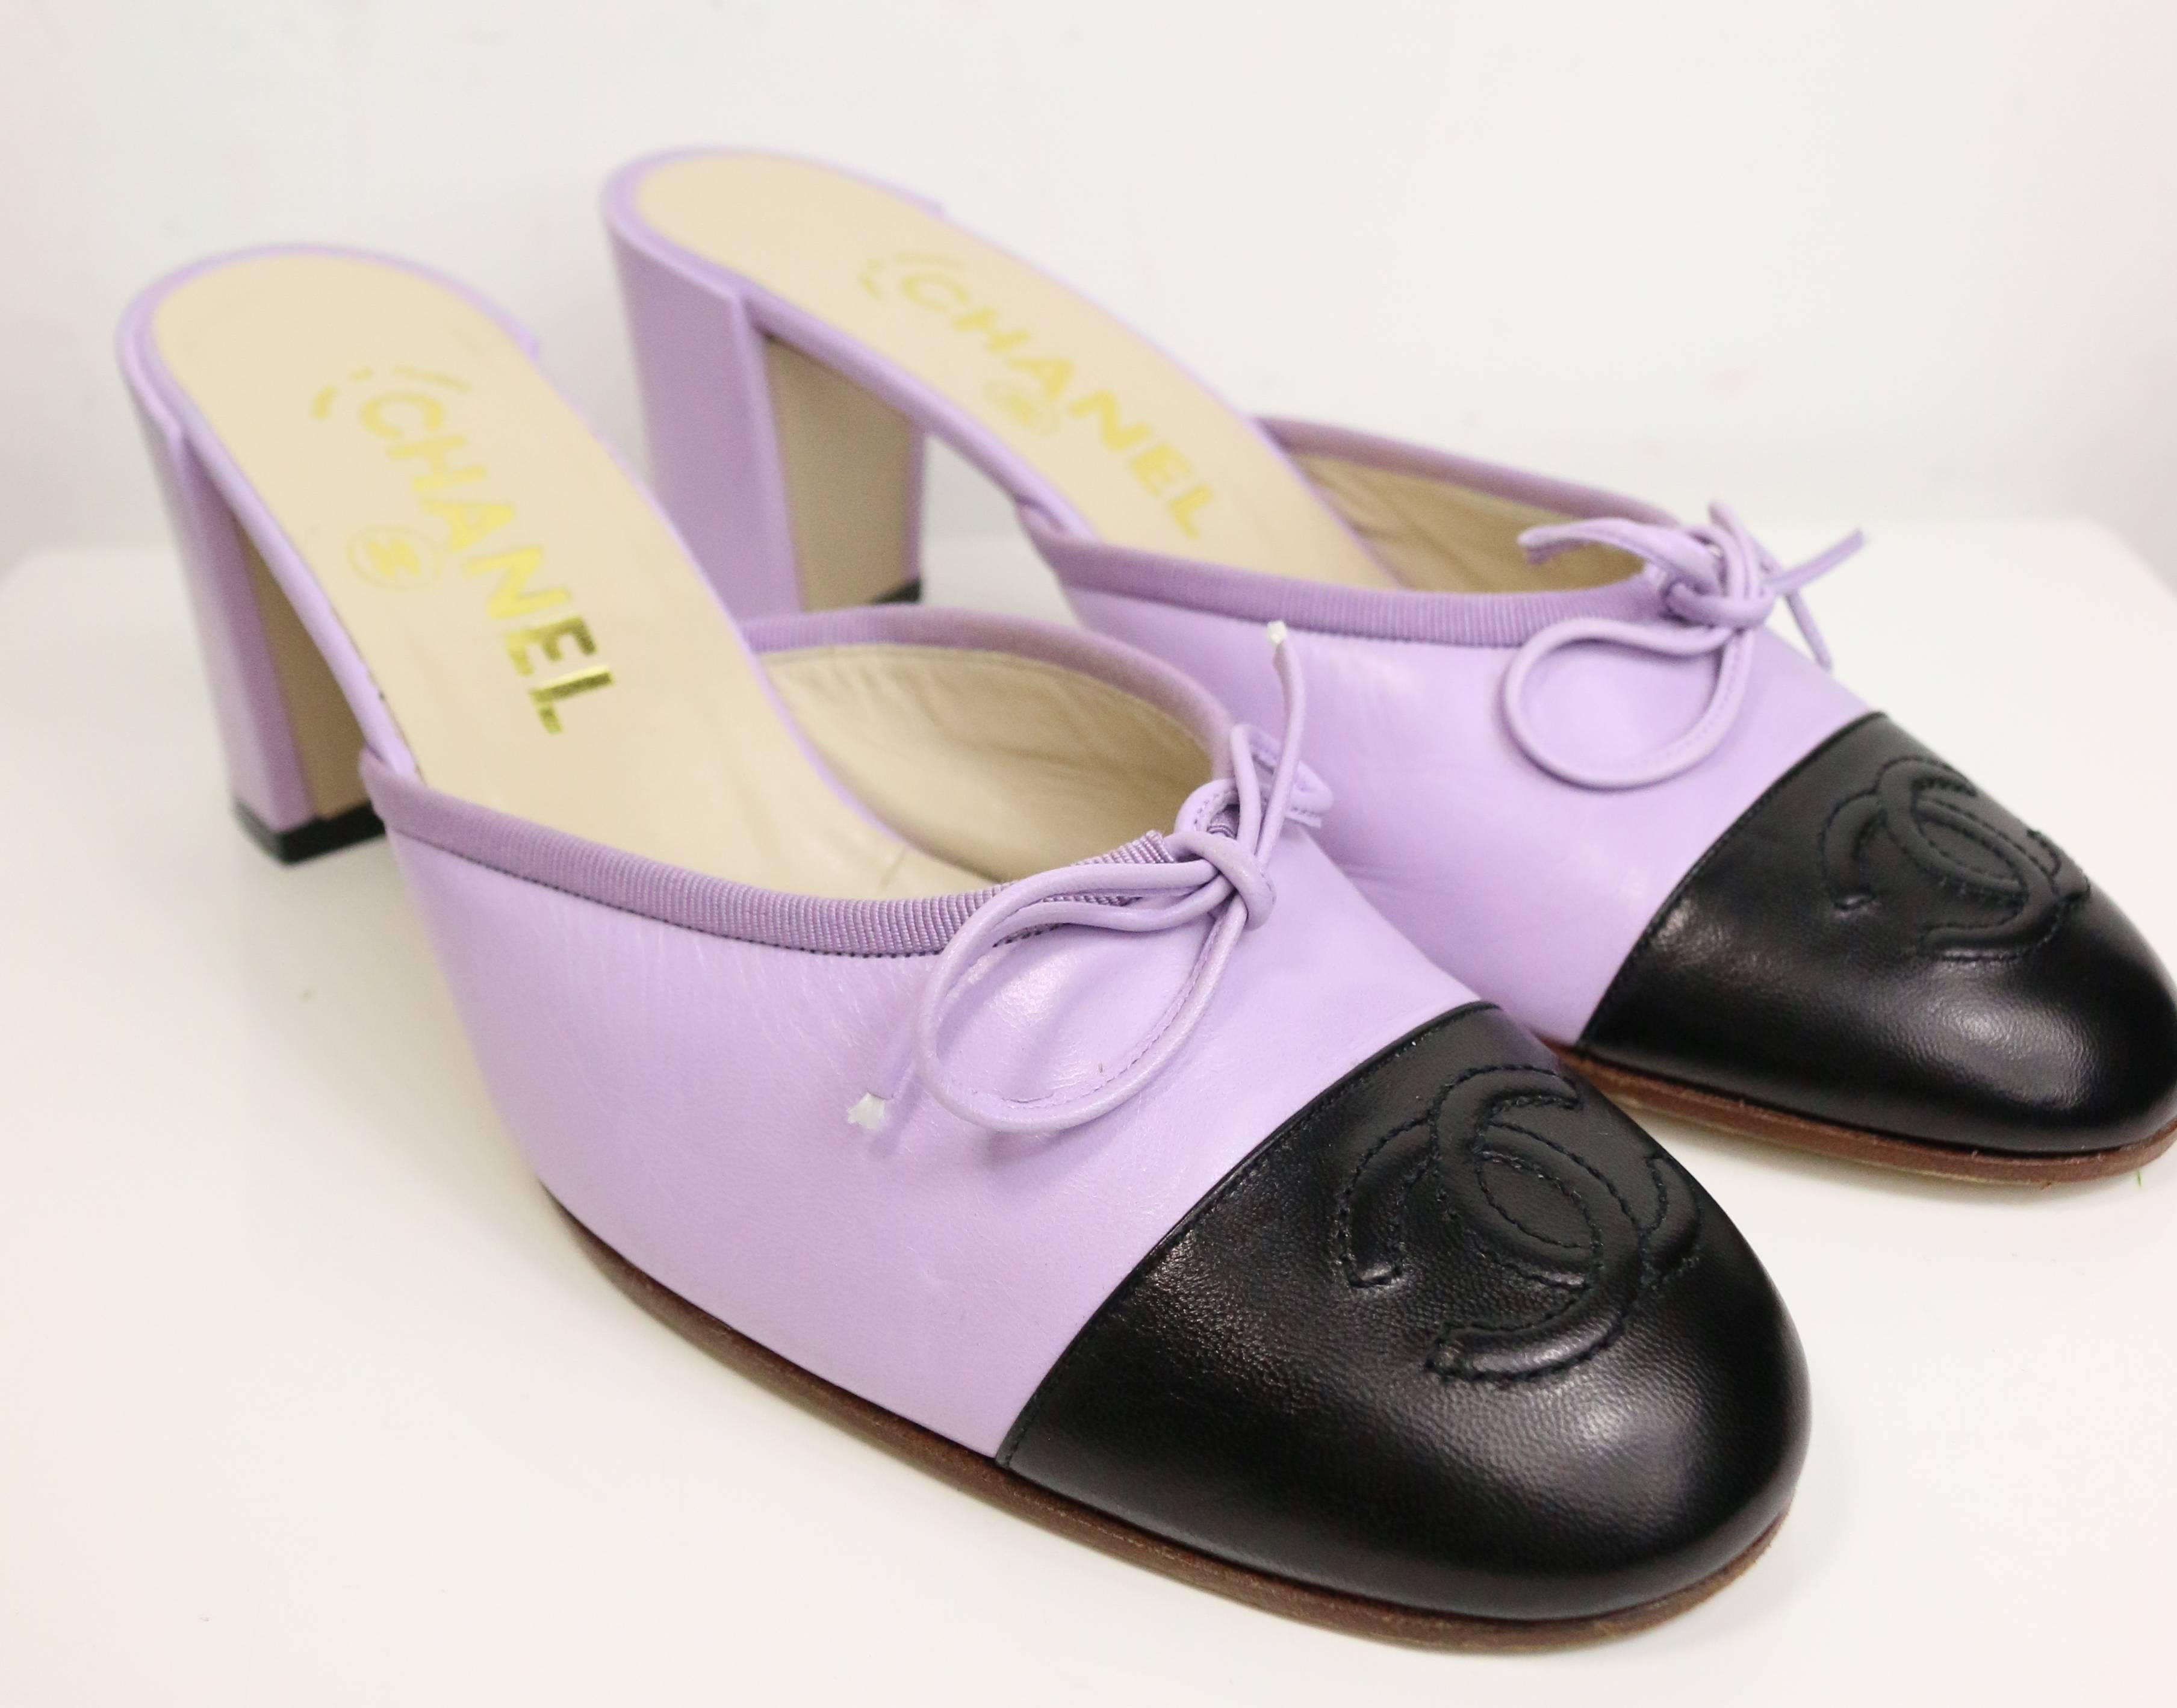 - Vintage 90s rare and classic Chanel bi tones purple/black shoe laces mules.  Classic style with a twisted of color. 

- Size 38. 

- Length: 9in I Height Heels: 3in. 

- Include: Dust bag. 

- Please note this vintage item is not new, so it might